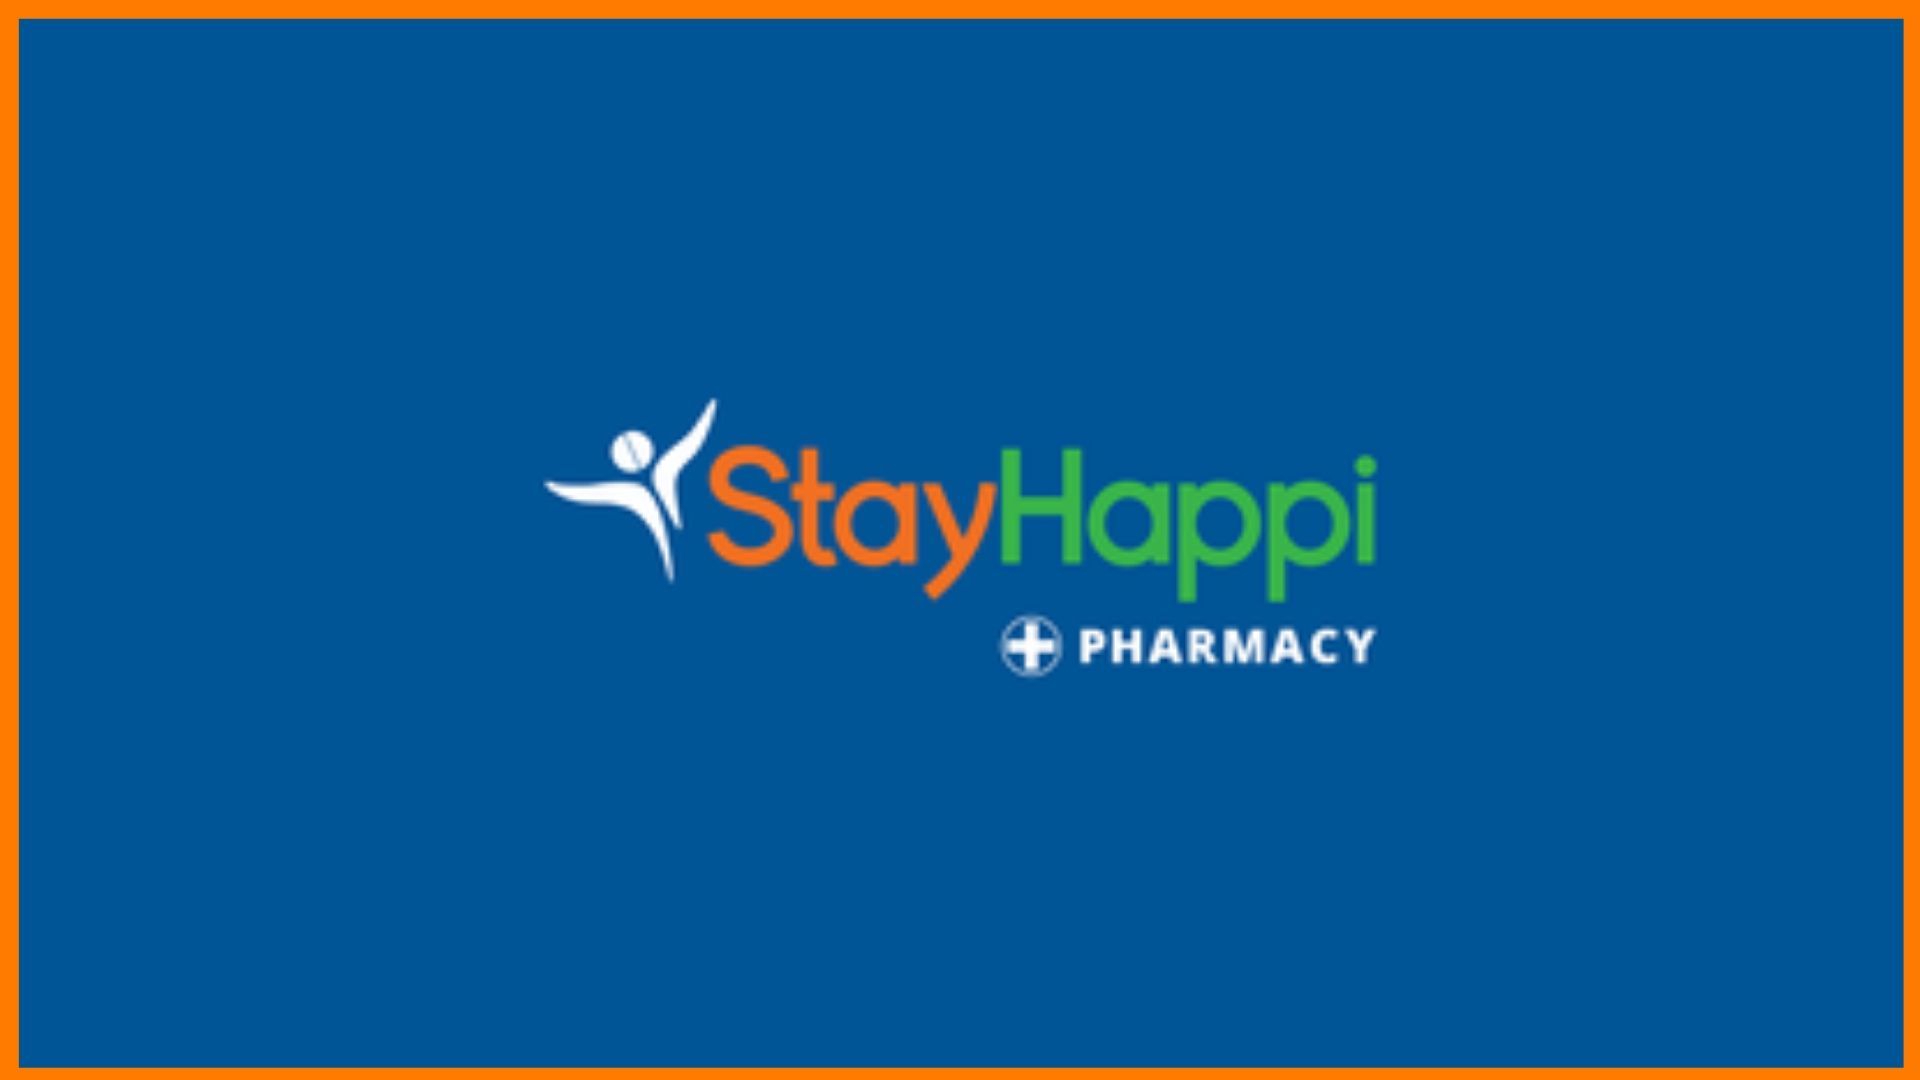 StayHappi - Making HealthCare Affordable with Generic Medicines!